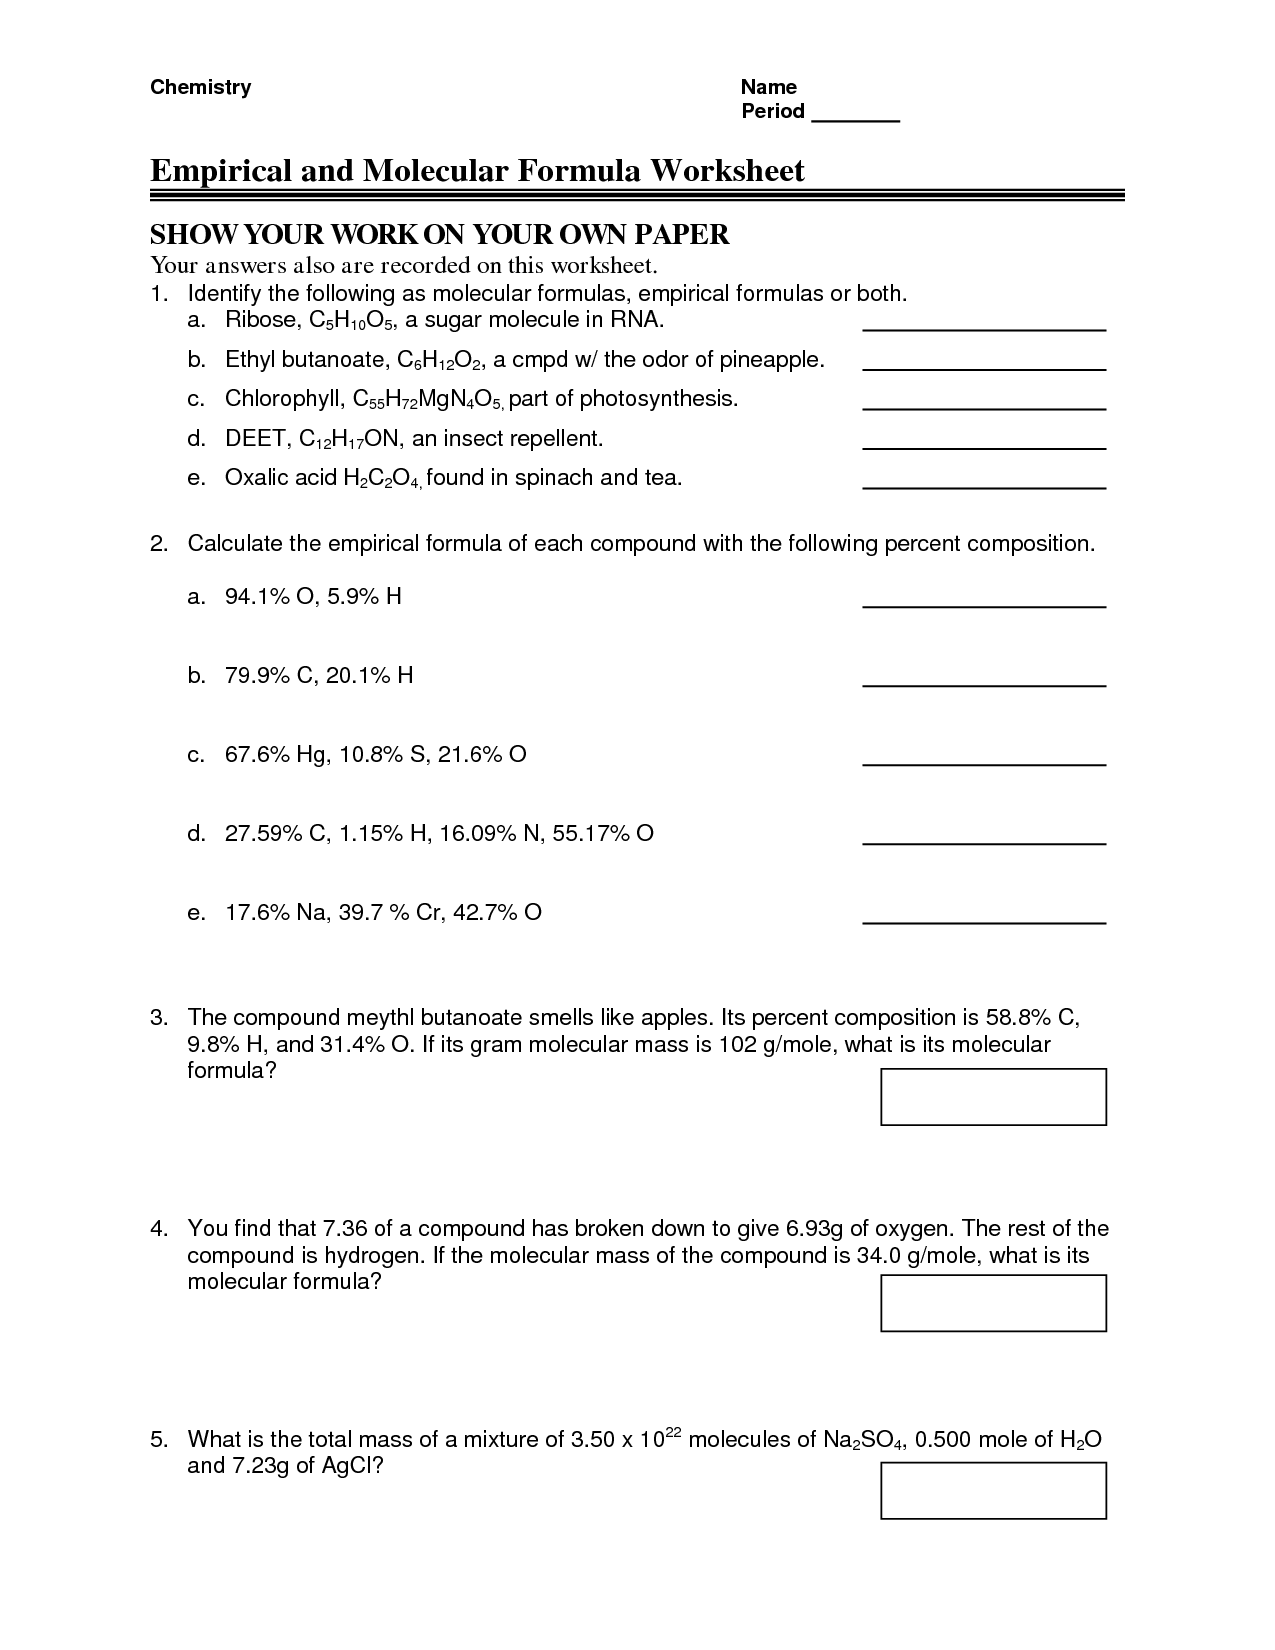 12-best-images-of-empirical-formula-worksheet-with-answers-molecular